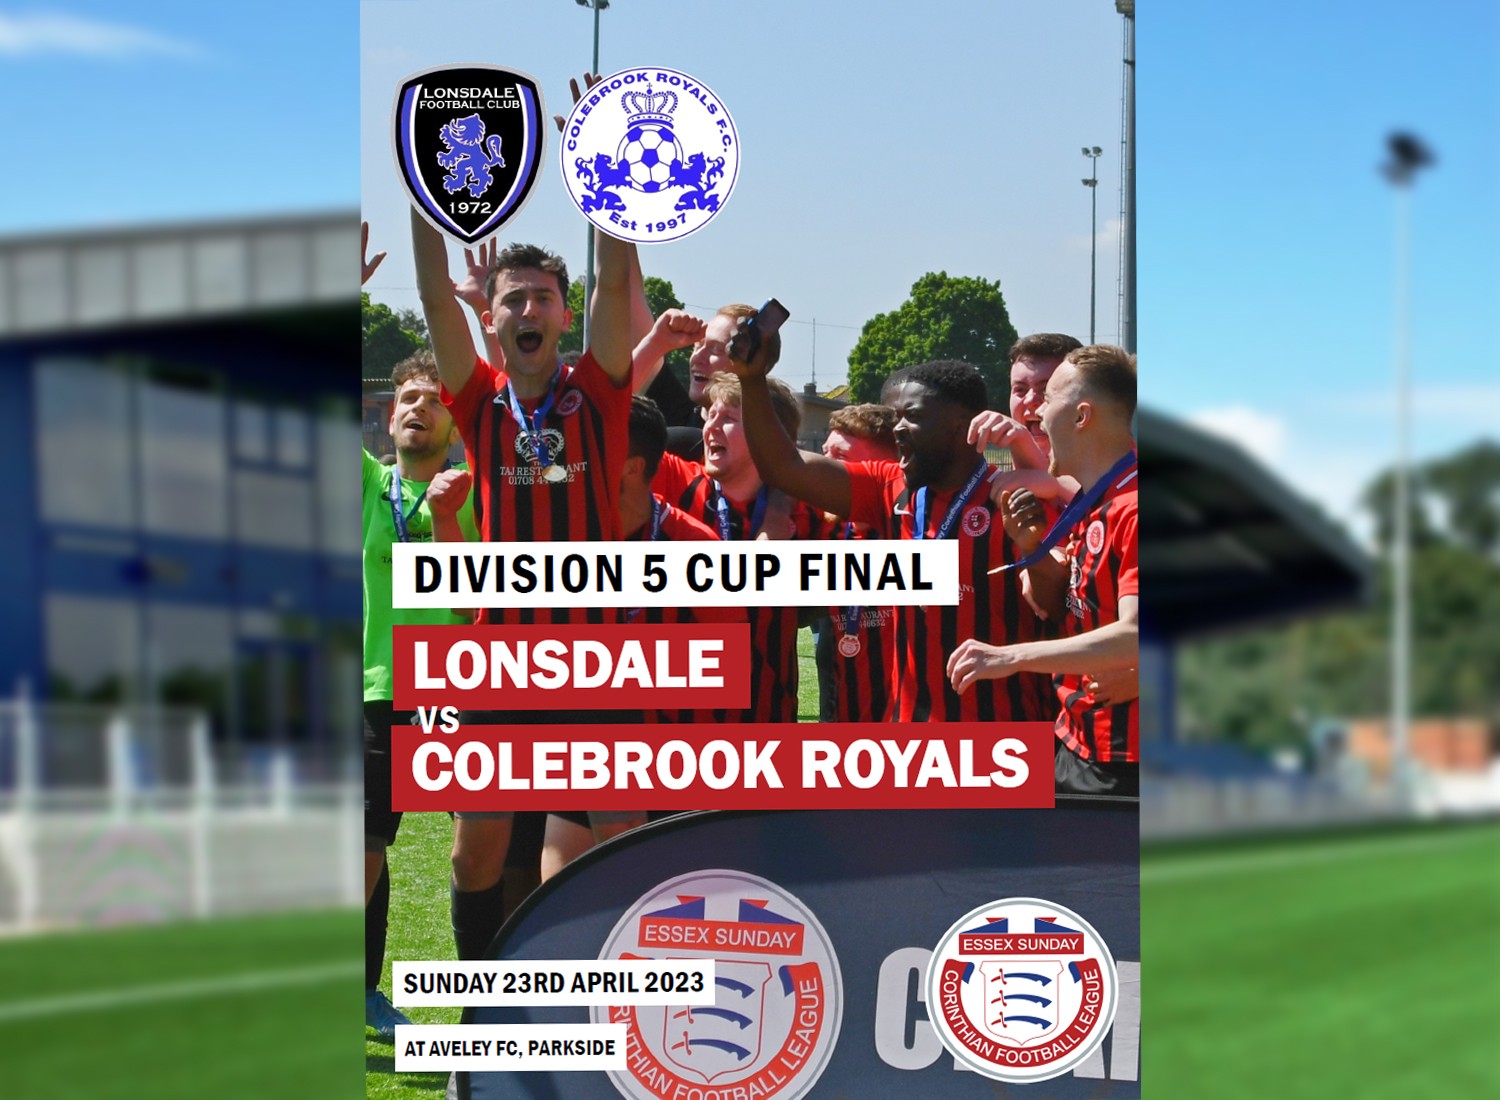 Lonsdale and Colebrook Royals face-off for Division 5 Cup this Sunday